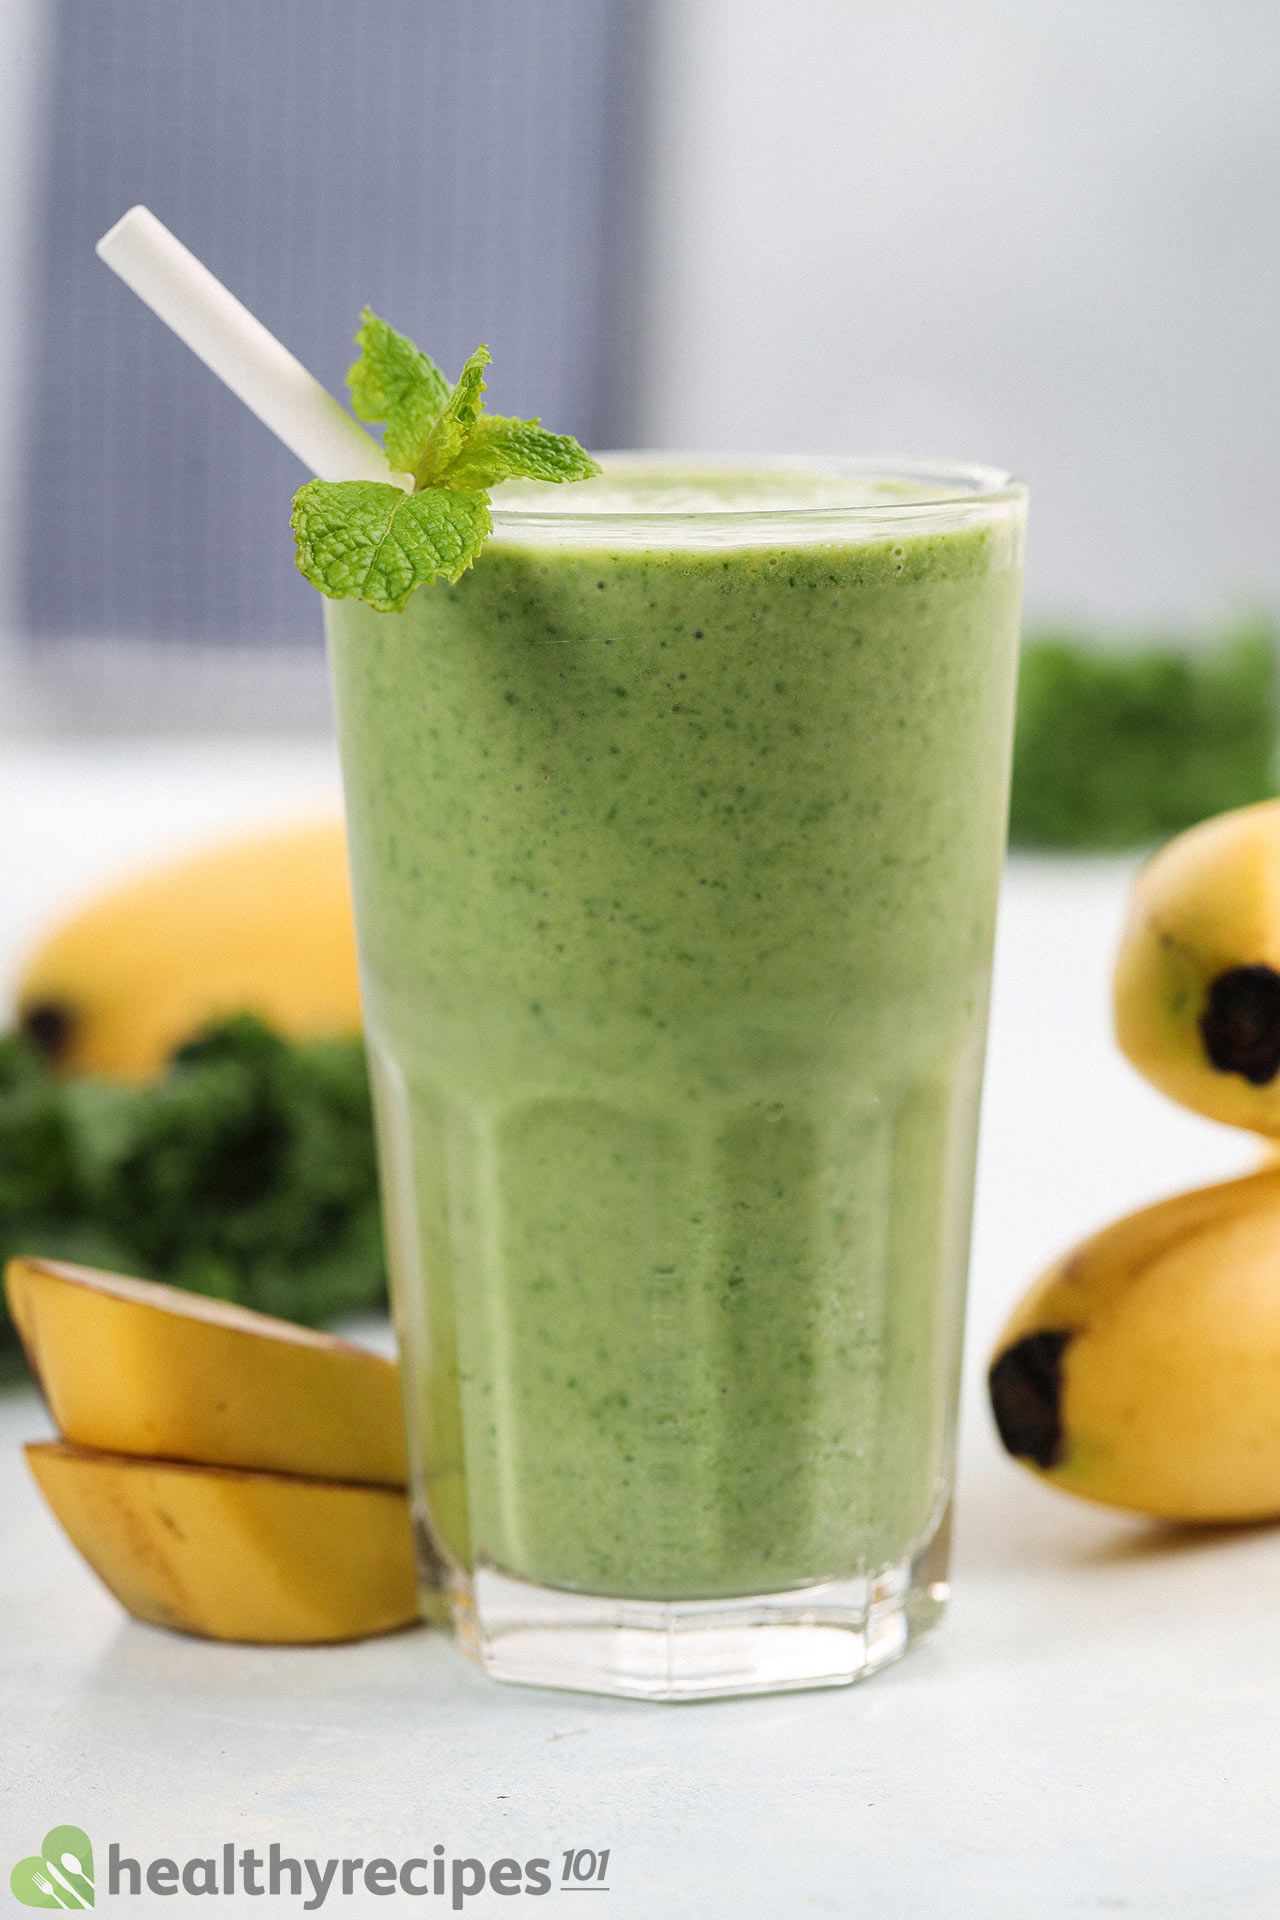 Is This Kale Banana Smoothie Recipe Healthy